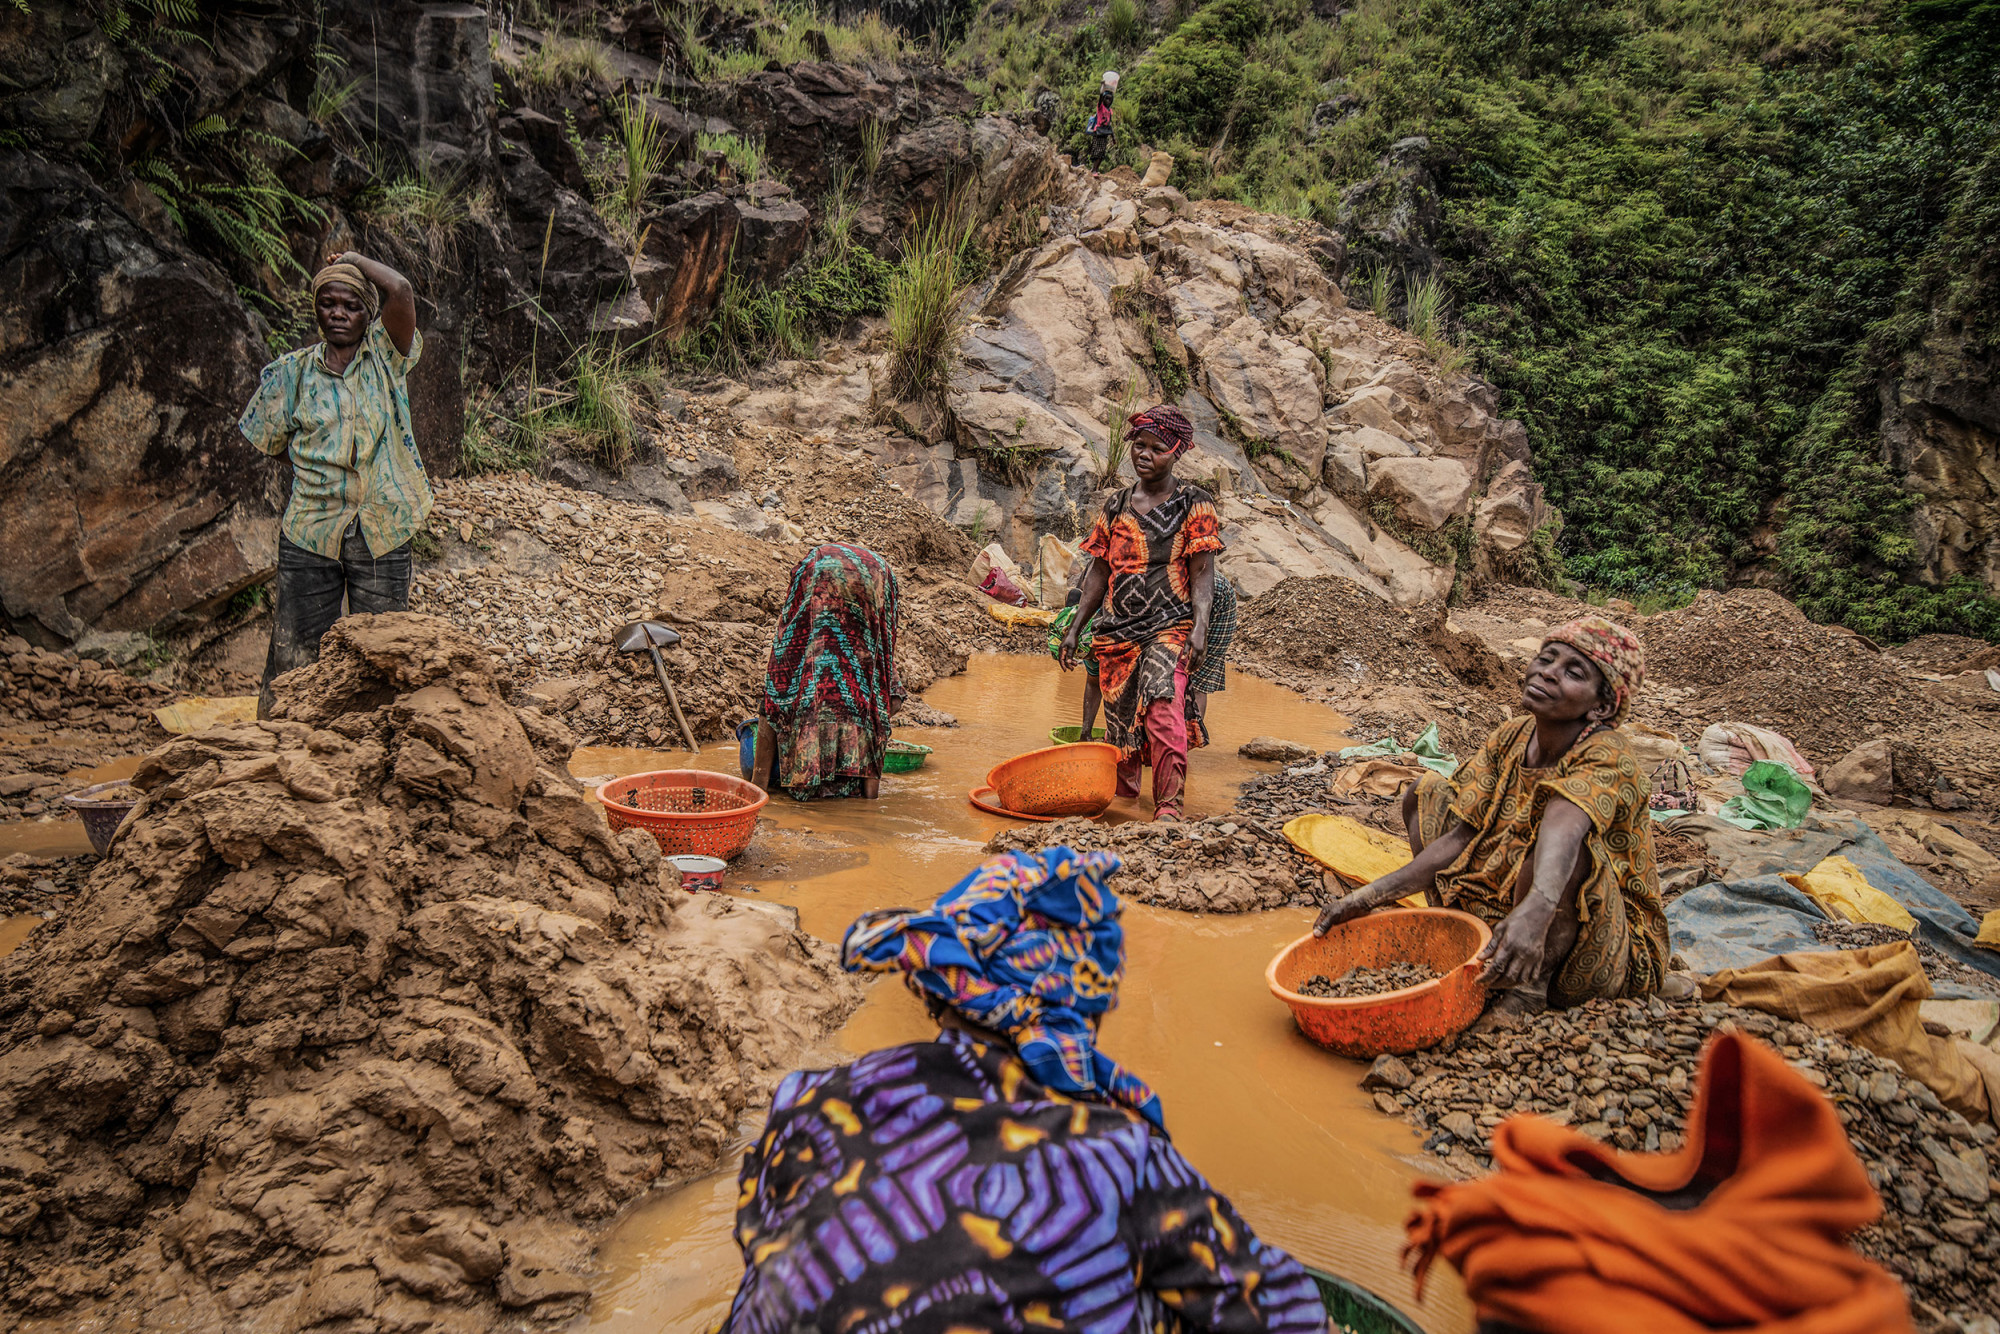 South Kivu Province, March 2021. Women and children pan for gold at a mine called D3 in Kamituga. © Moses Sawasawa for Fondation Carmignac